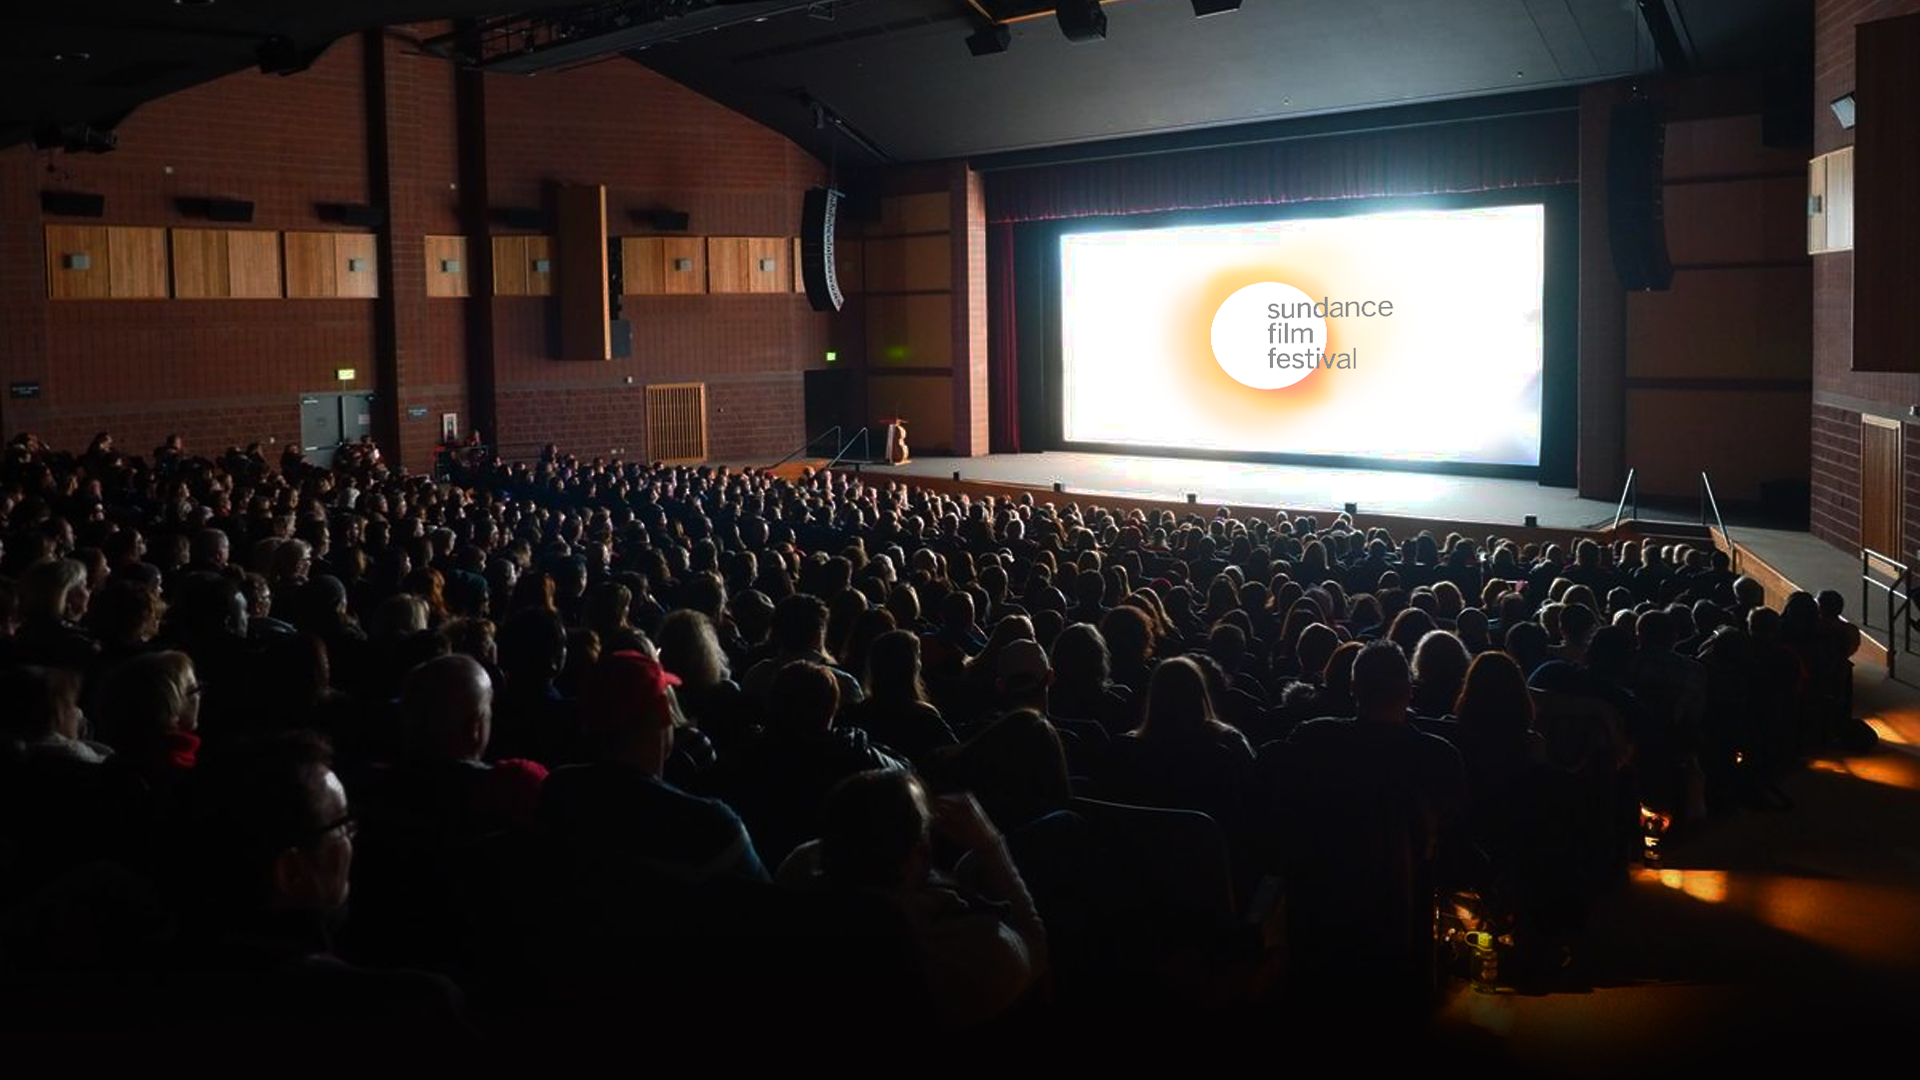 A movie theater full of people with a screen that has "Sundance Film Festival" written.